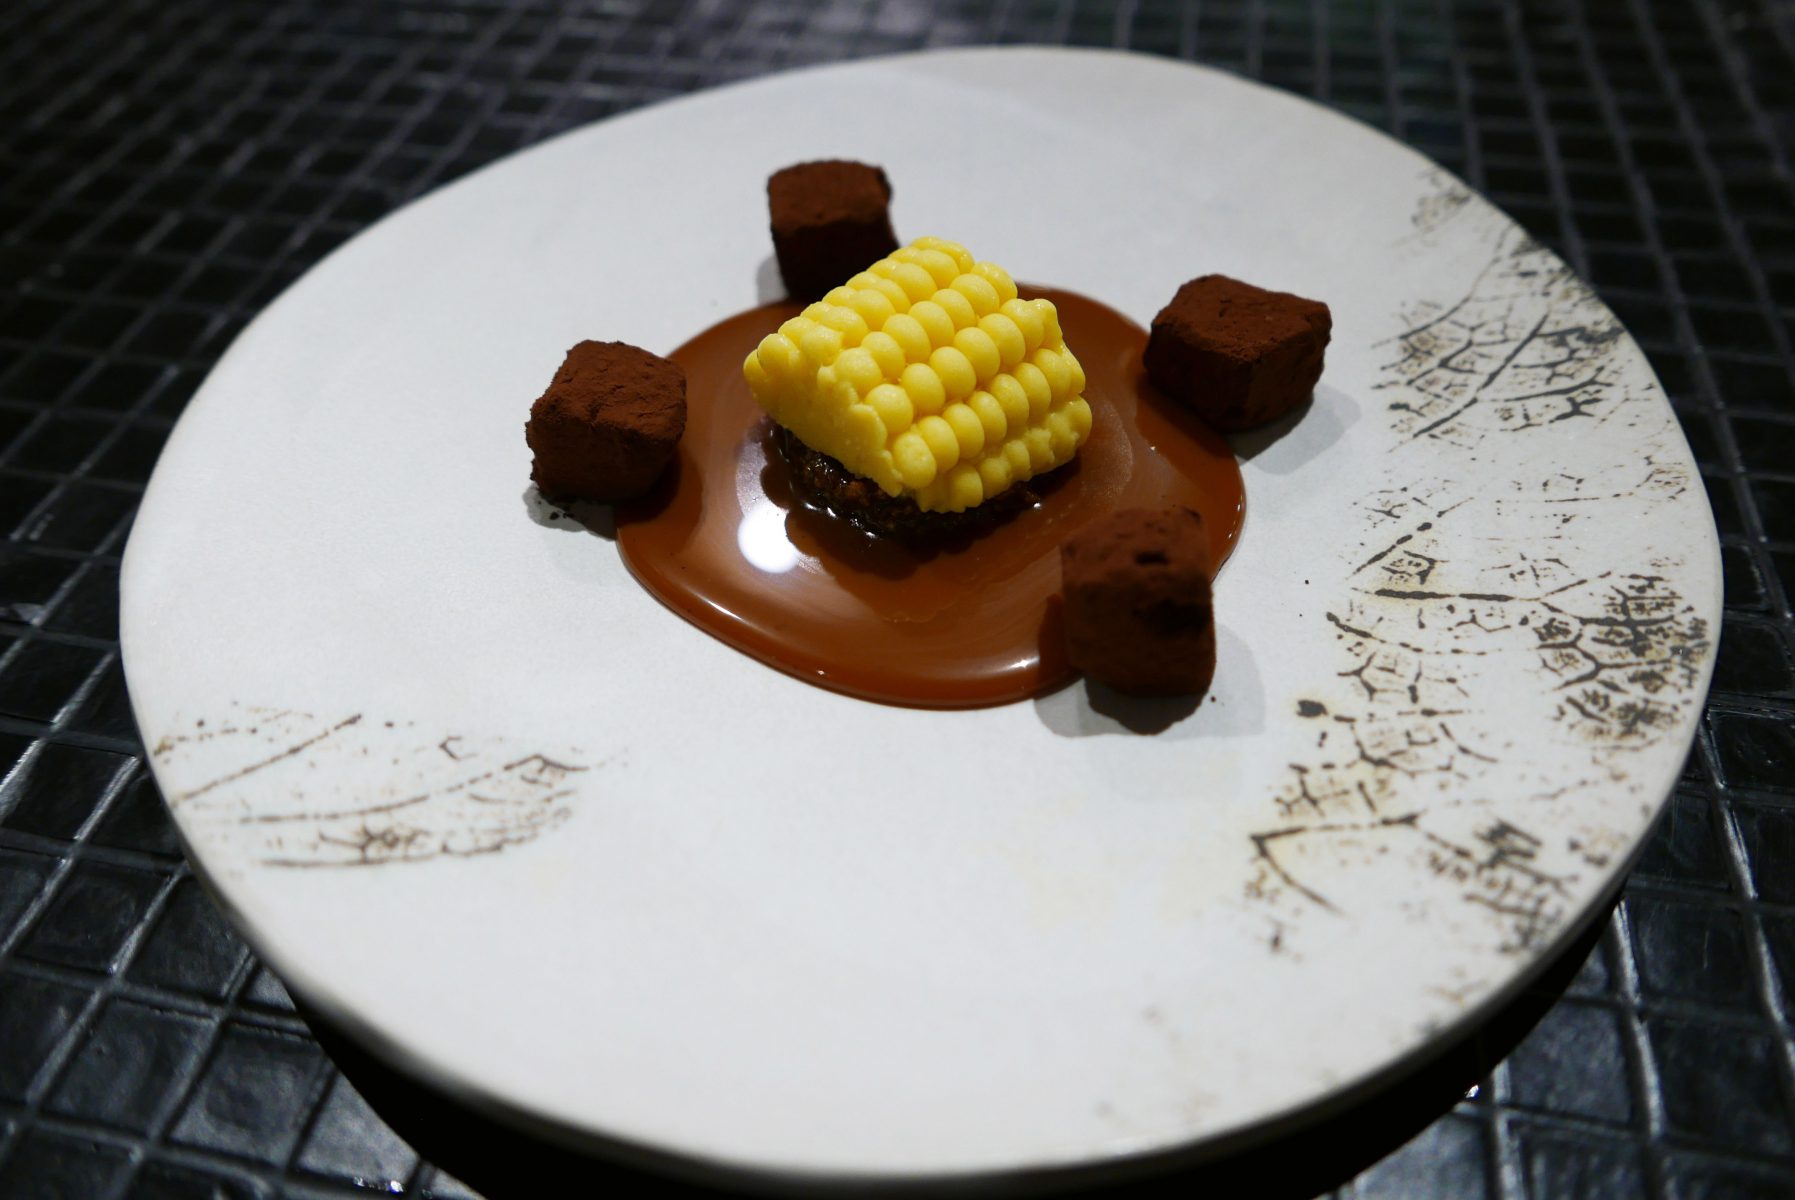 Corn ice cream,peanuts praliné biscuit,chocolate and dulce de leche at Hoja Santa in Barcelona, September